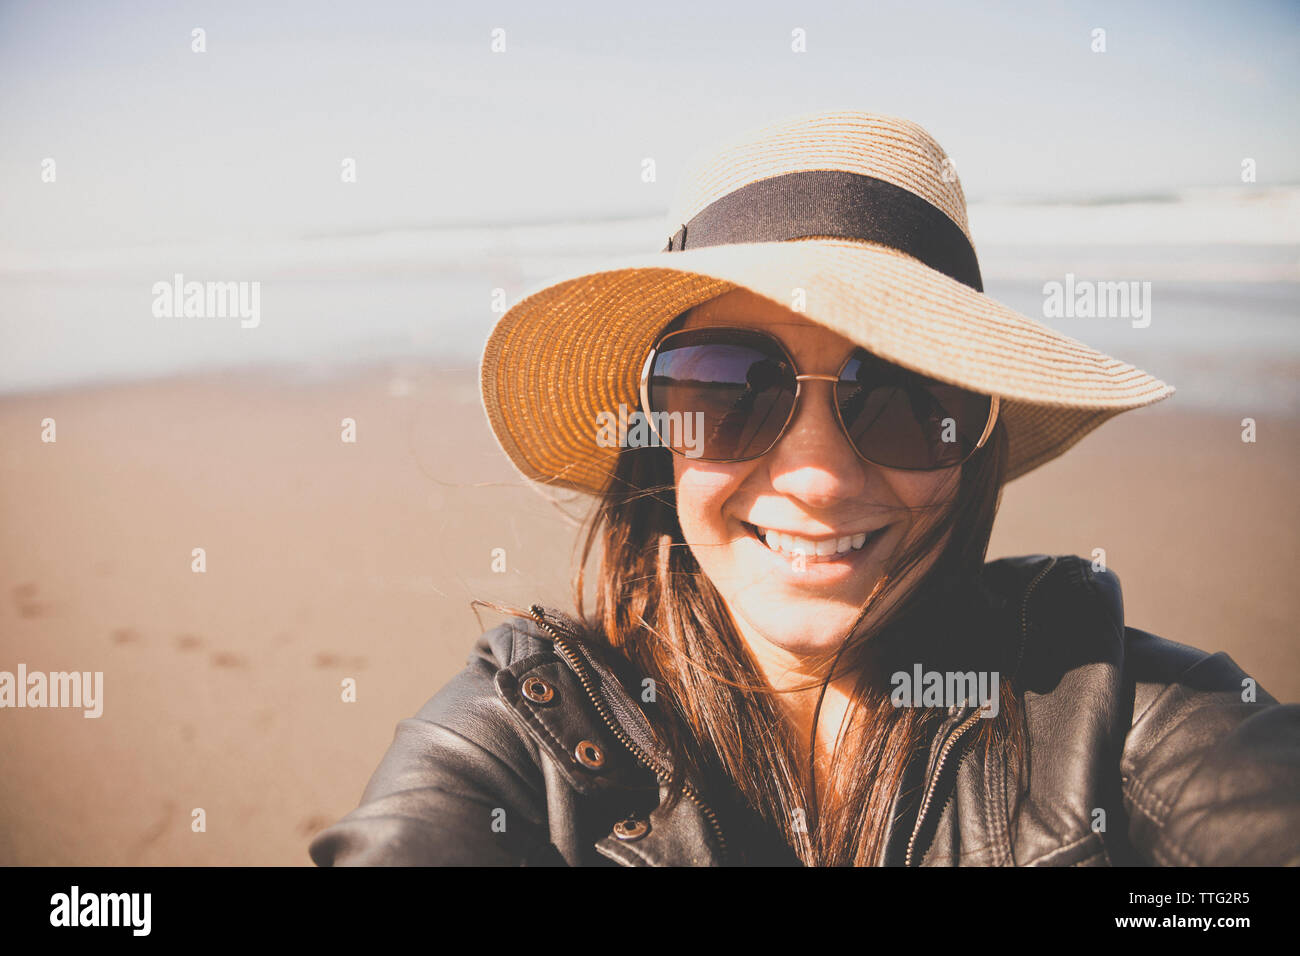 Close-up portrait of woman standing at beach Banque D'Images